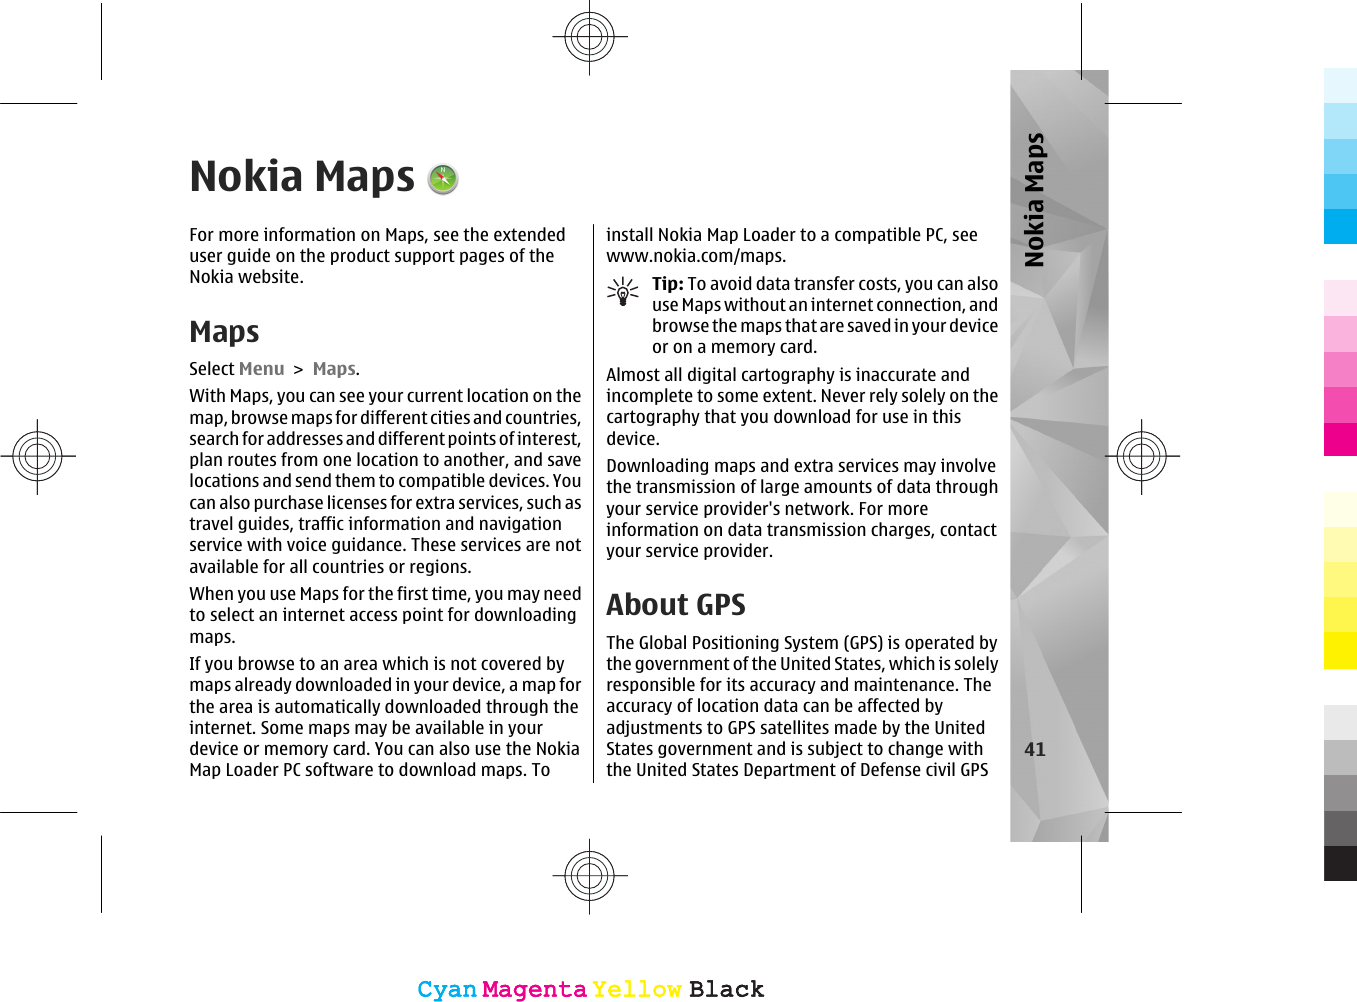 Nokia MapsFor more information on Maps, see the extendeduser guide on the product support pages of theNokia website.MapsSelect Menu &gt; Maps.With Maps, you can see your current location on themap, browse maps for different cities and countries,search for addresses and different points of interest,plan routes from one location to another, and savelocations and send them to compatible devices. Youcan also purchase licenses for extra services, such astravel guides, traffic information and navigationservice with voice guidance. These services are notavailable for all countries or regions.When you use Maps for the first time, you may needto select an internet access point for downloadingmaps.If you browse to an area which is not covered bymaps already downloaded in your device, a map forthe area is automatically downloaded through theinternet. Some maps may be available in yourdevice or memory card. You can also use the NokiaMap Loader PC software to download maps. Toinstall Nokia Map Loader to a compatible PC, seewww.nokia.com/maps.Tip: To avoid data transfer costs, you can alsouse Maps without an internet connection, andbrowse the maps that are saved in your deviceor on a memory card.Almost all digital cartography is inaccurate andincomplete to some extent. Never rely solely on thecartography that you download for use in thisdevice.Downloading maps and extra services may involvethe transmission of large amounts of data throughyour service provider&apos;s network. For moreinformation on data transmission charges, contactyour service provider.About GPSThe Global Positioning System (GPS) is operated bythe government of the United States, which is solelyresponsible for its accuracy and maintenance. Theaccuracy of location data can be affected byadjustments to GPS satellites made by the UnitedStates government and is subject to change withthe United States Department of Defense civil GPS41Nokia MapsCyanCyanMagentaMagentaYellowYellowBlackBlackCyanCyanMagentaMagentaYellowYellowBlackBlack